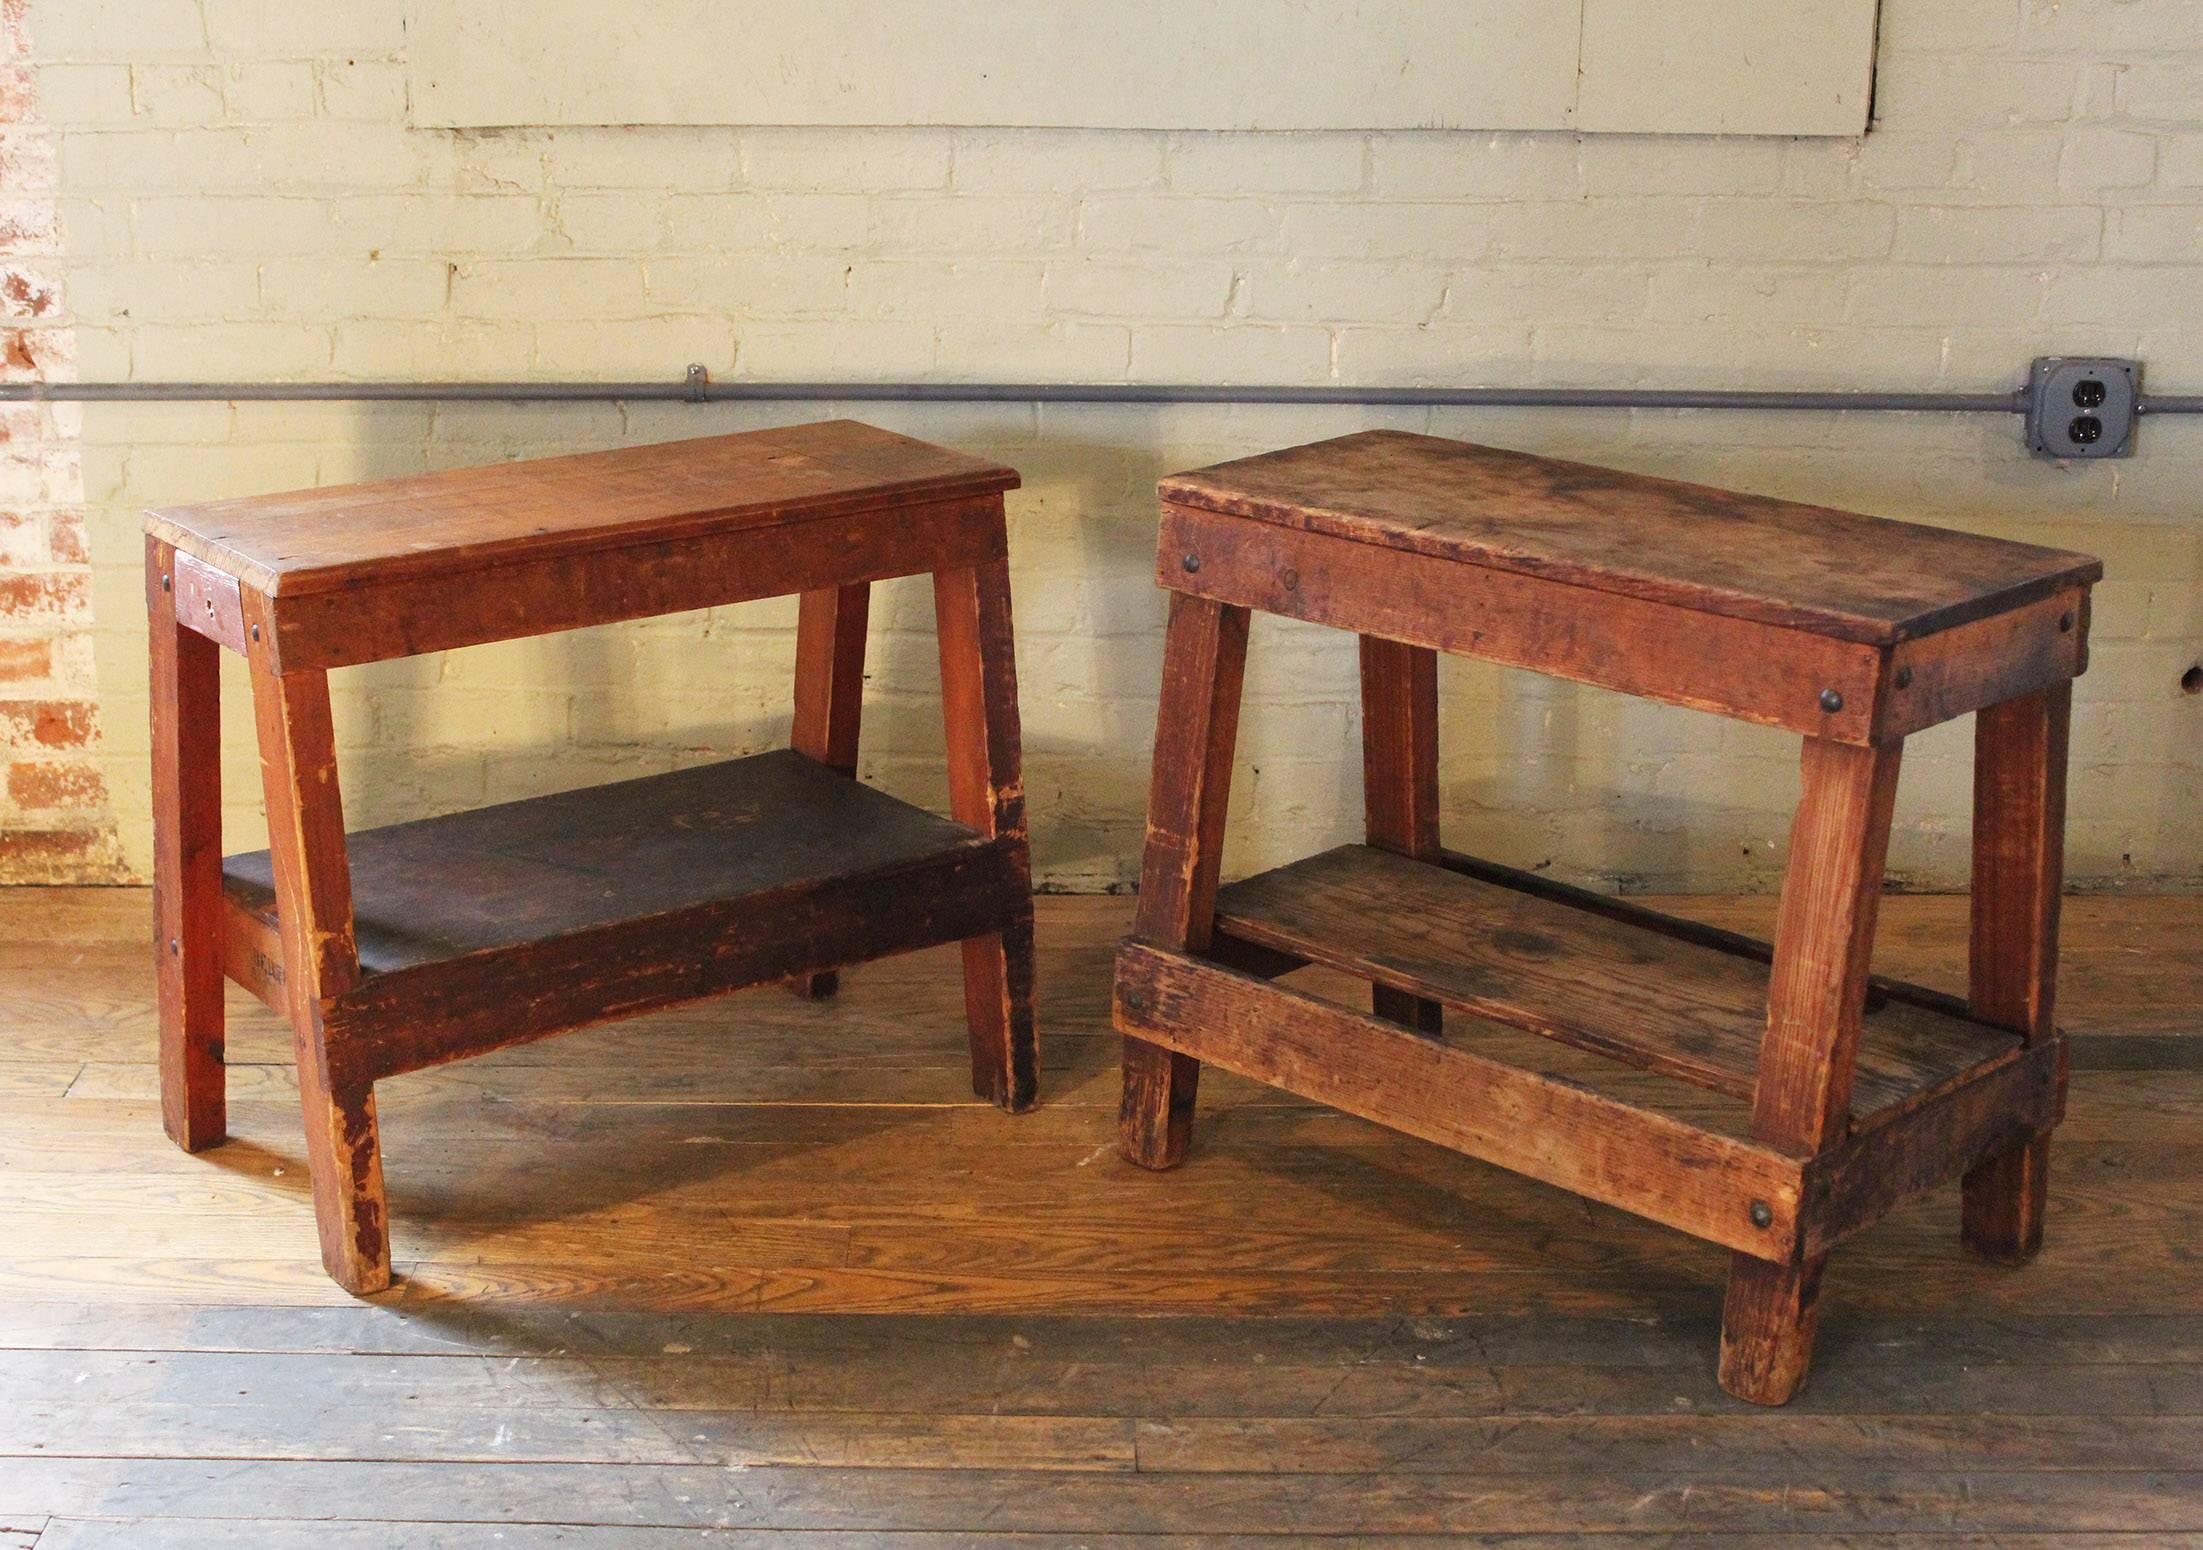 Pair of rustic wood factory shop work benches, side, end tables, saw horse style. Great distressed look, bench on the left. Measures: 16 7/8